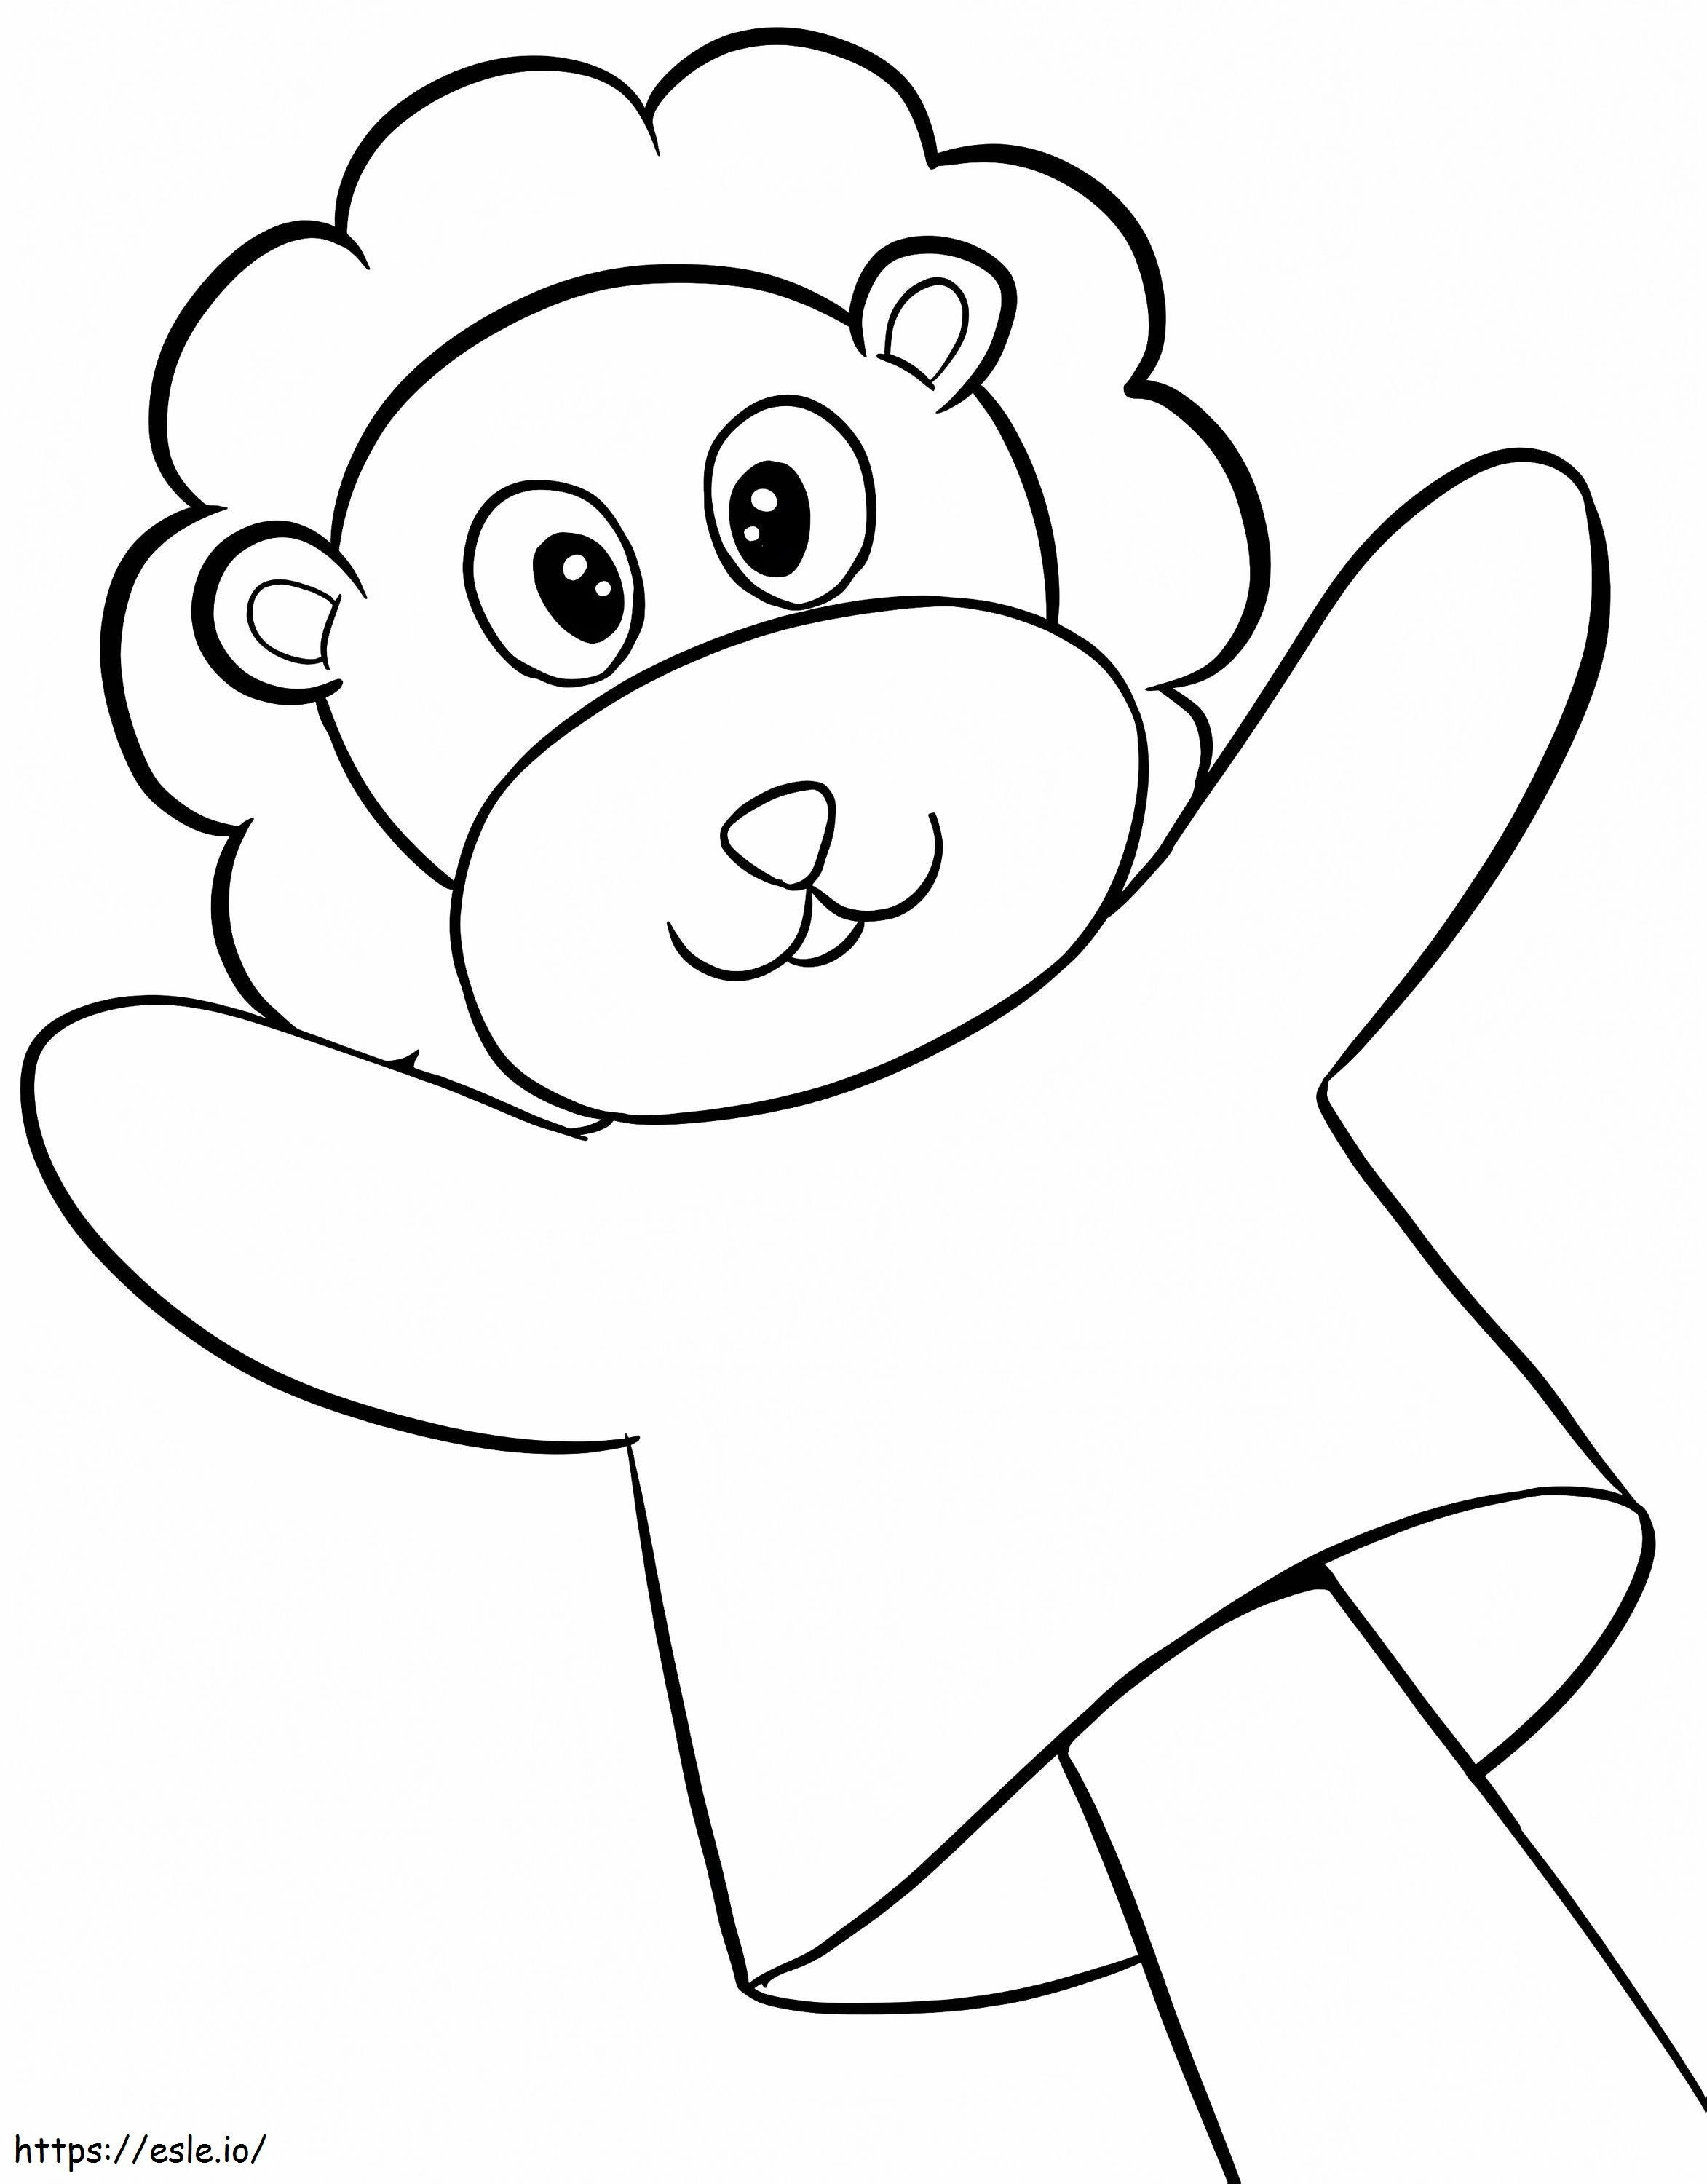 Lion Hand Puppet coloring page